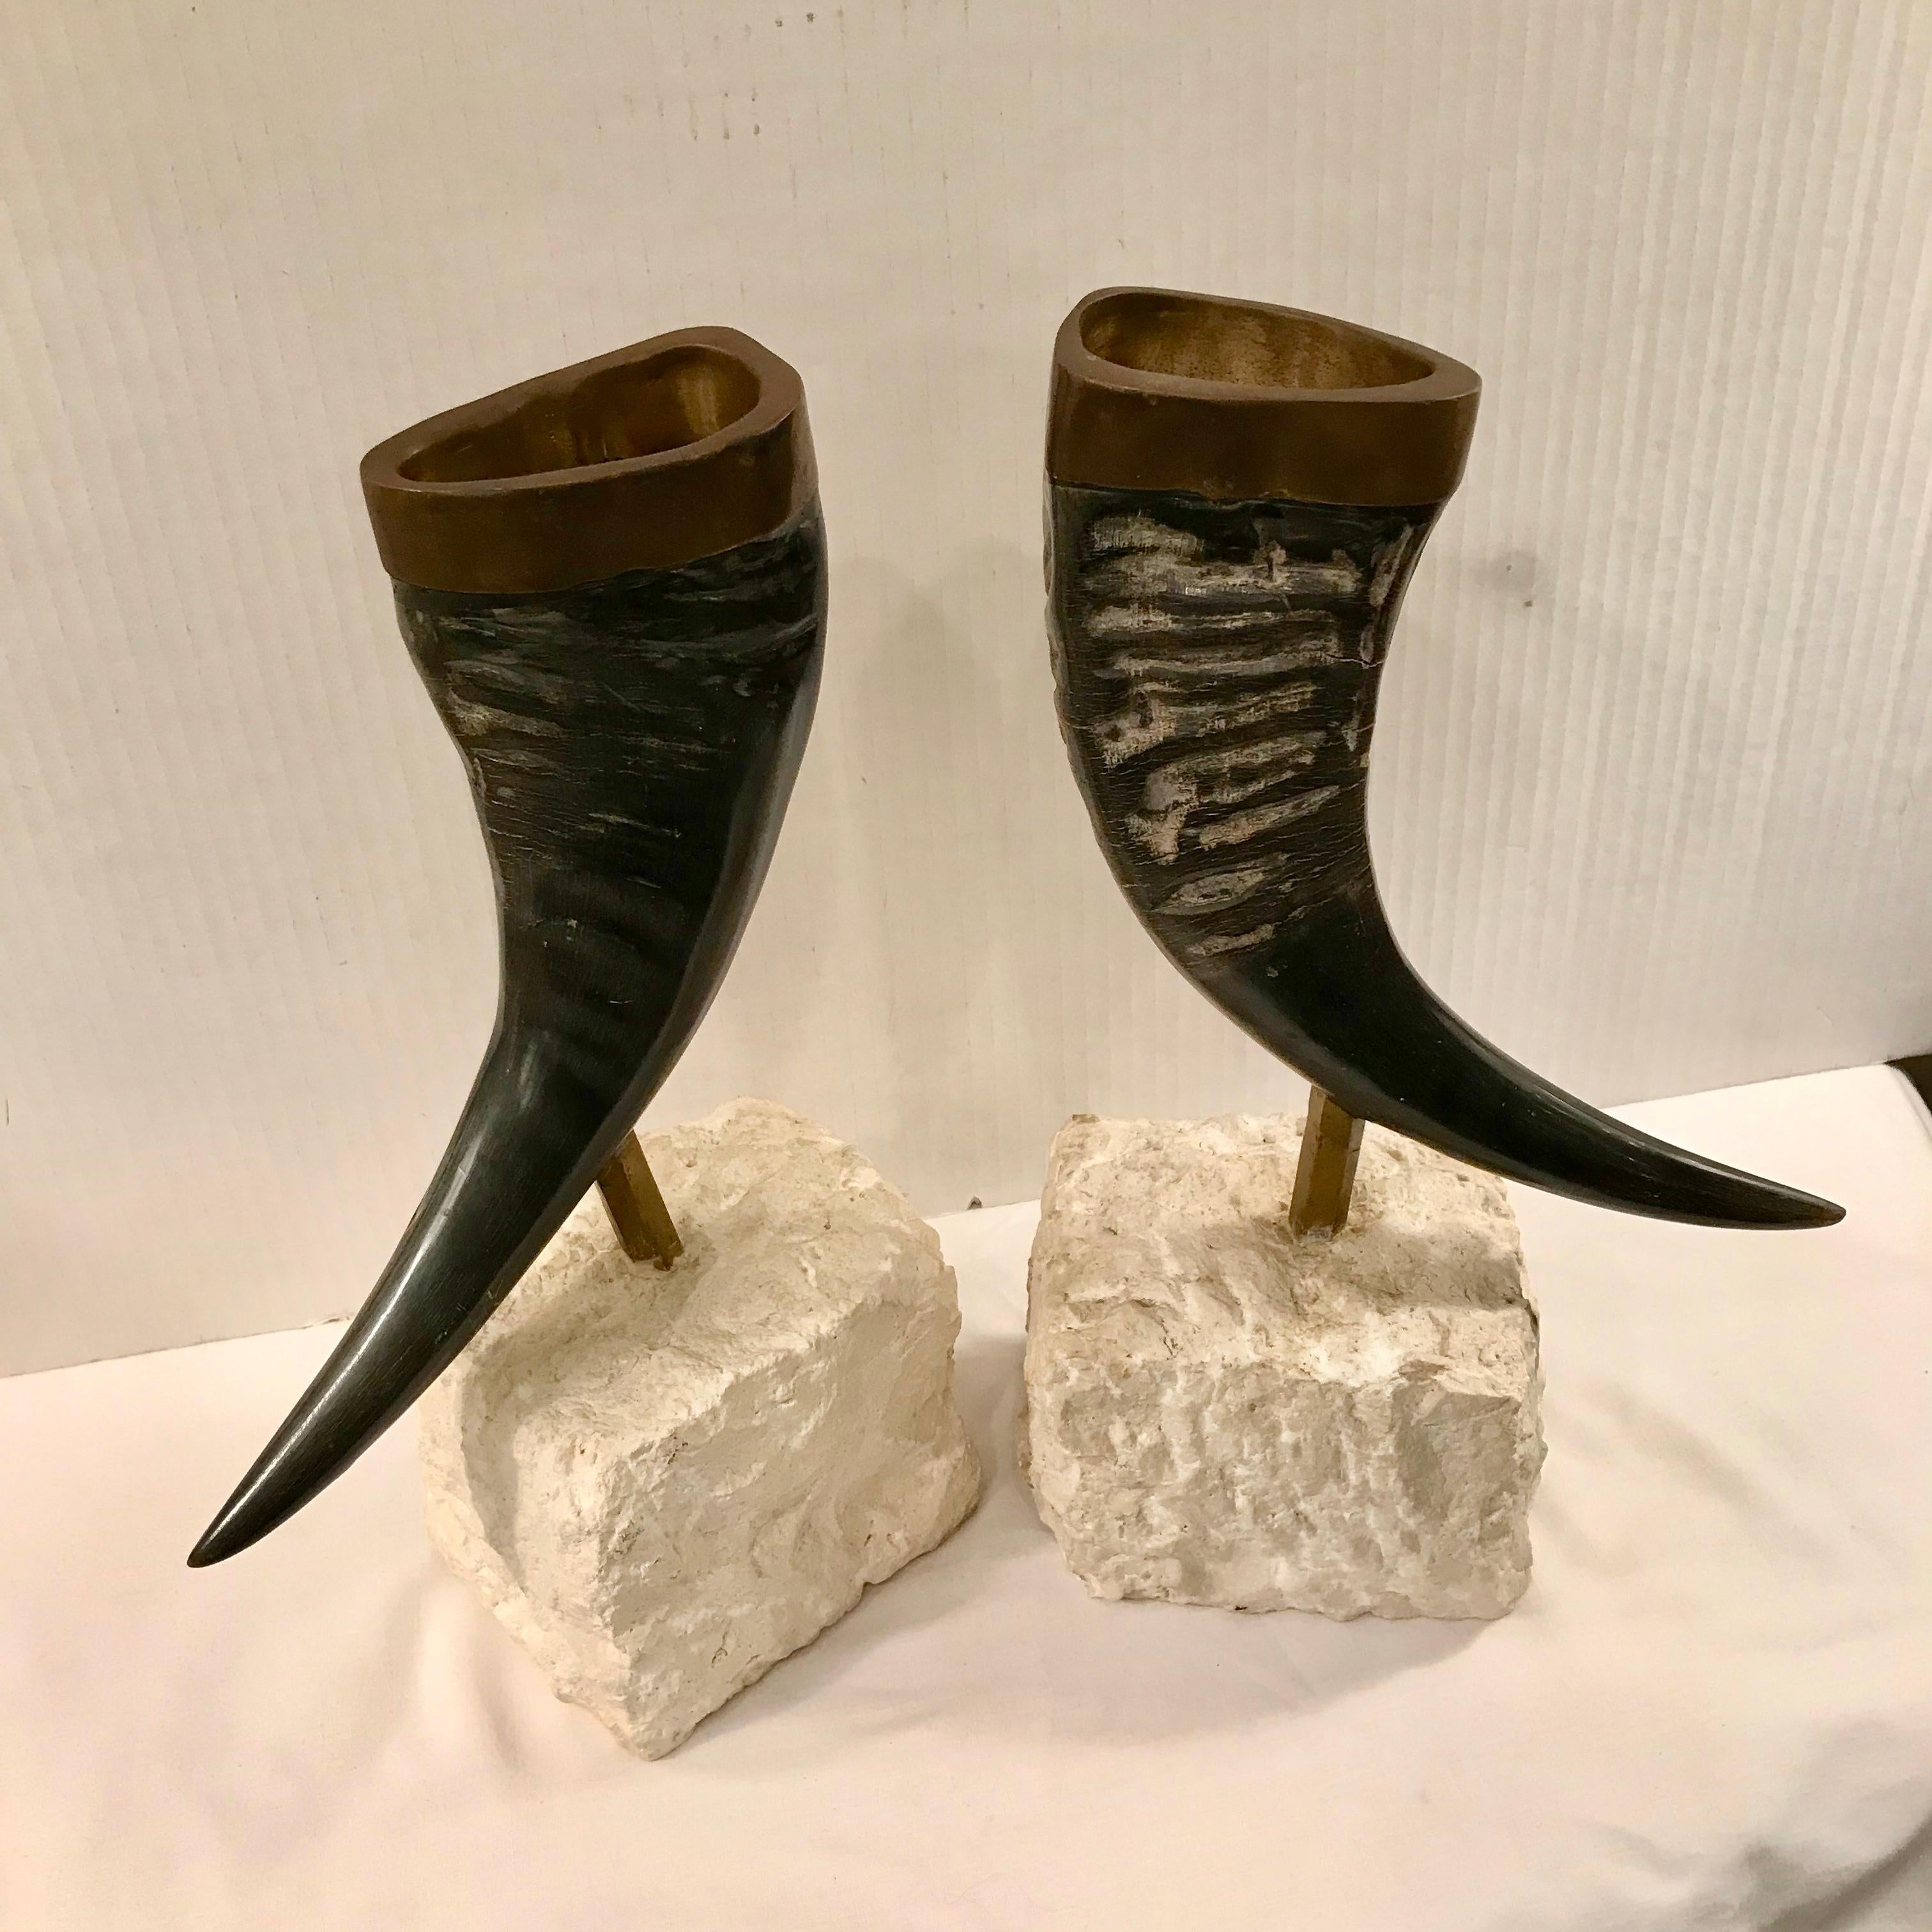 Stunning mounts trimmed in brass and displayed on stone stands.
Great as desk accents.